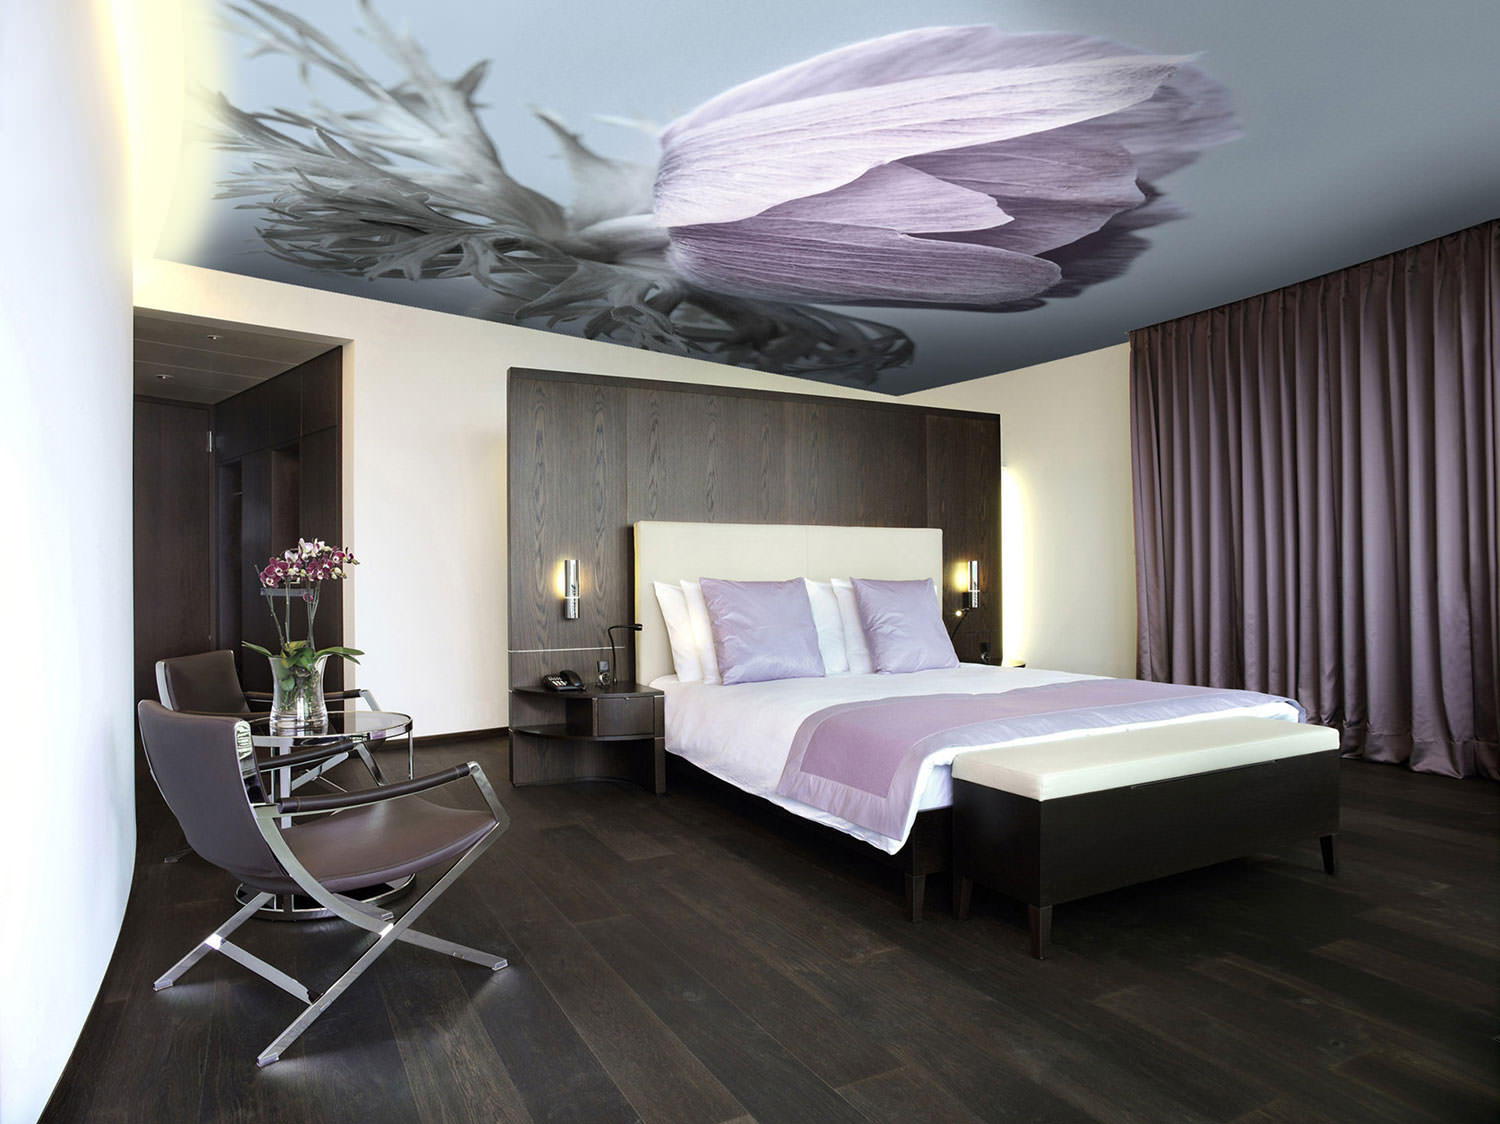 stretch ceilings in the bedroom with photo printing